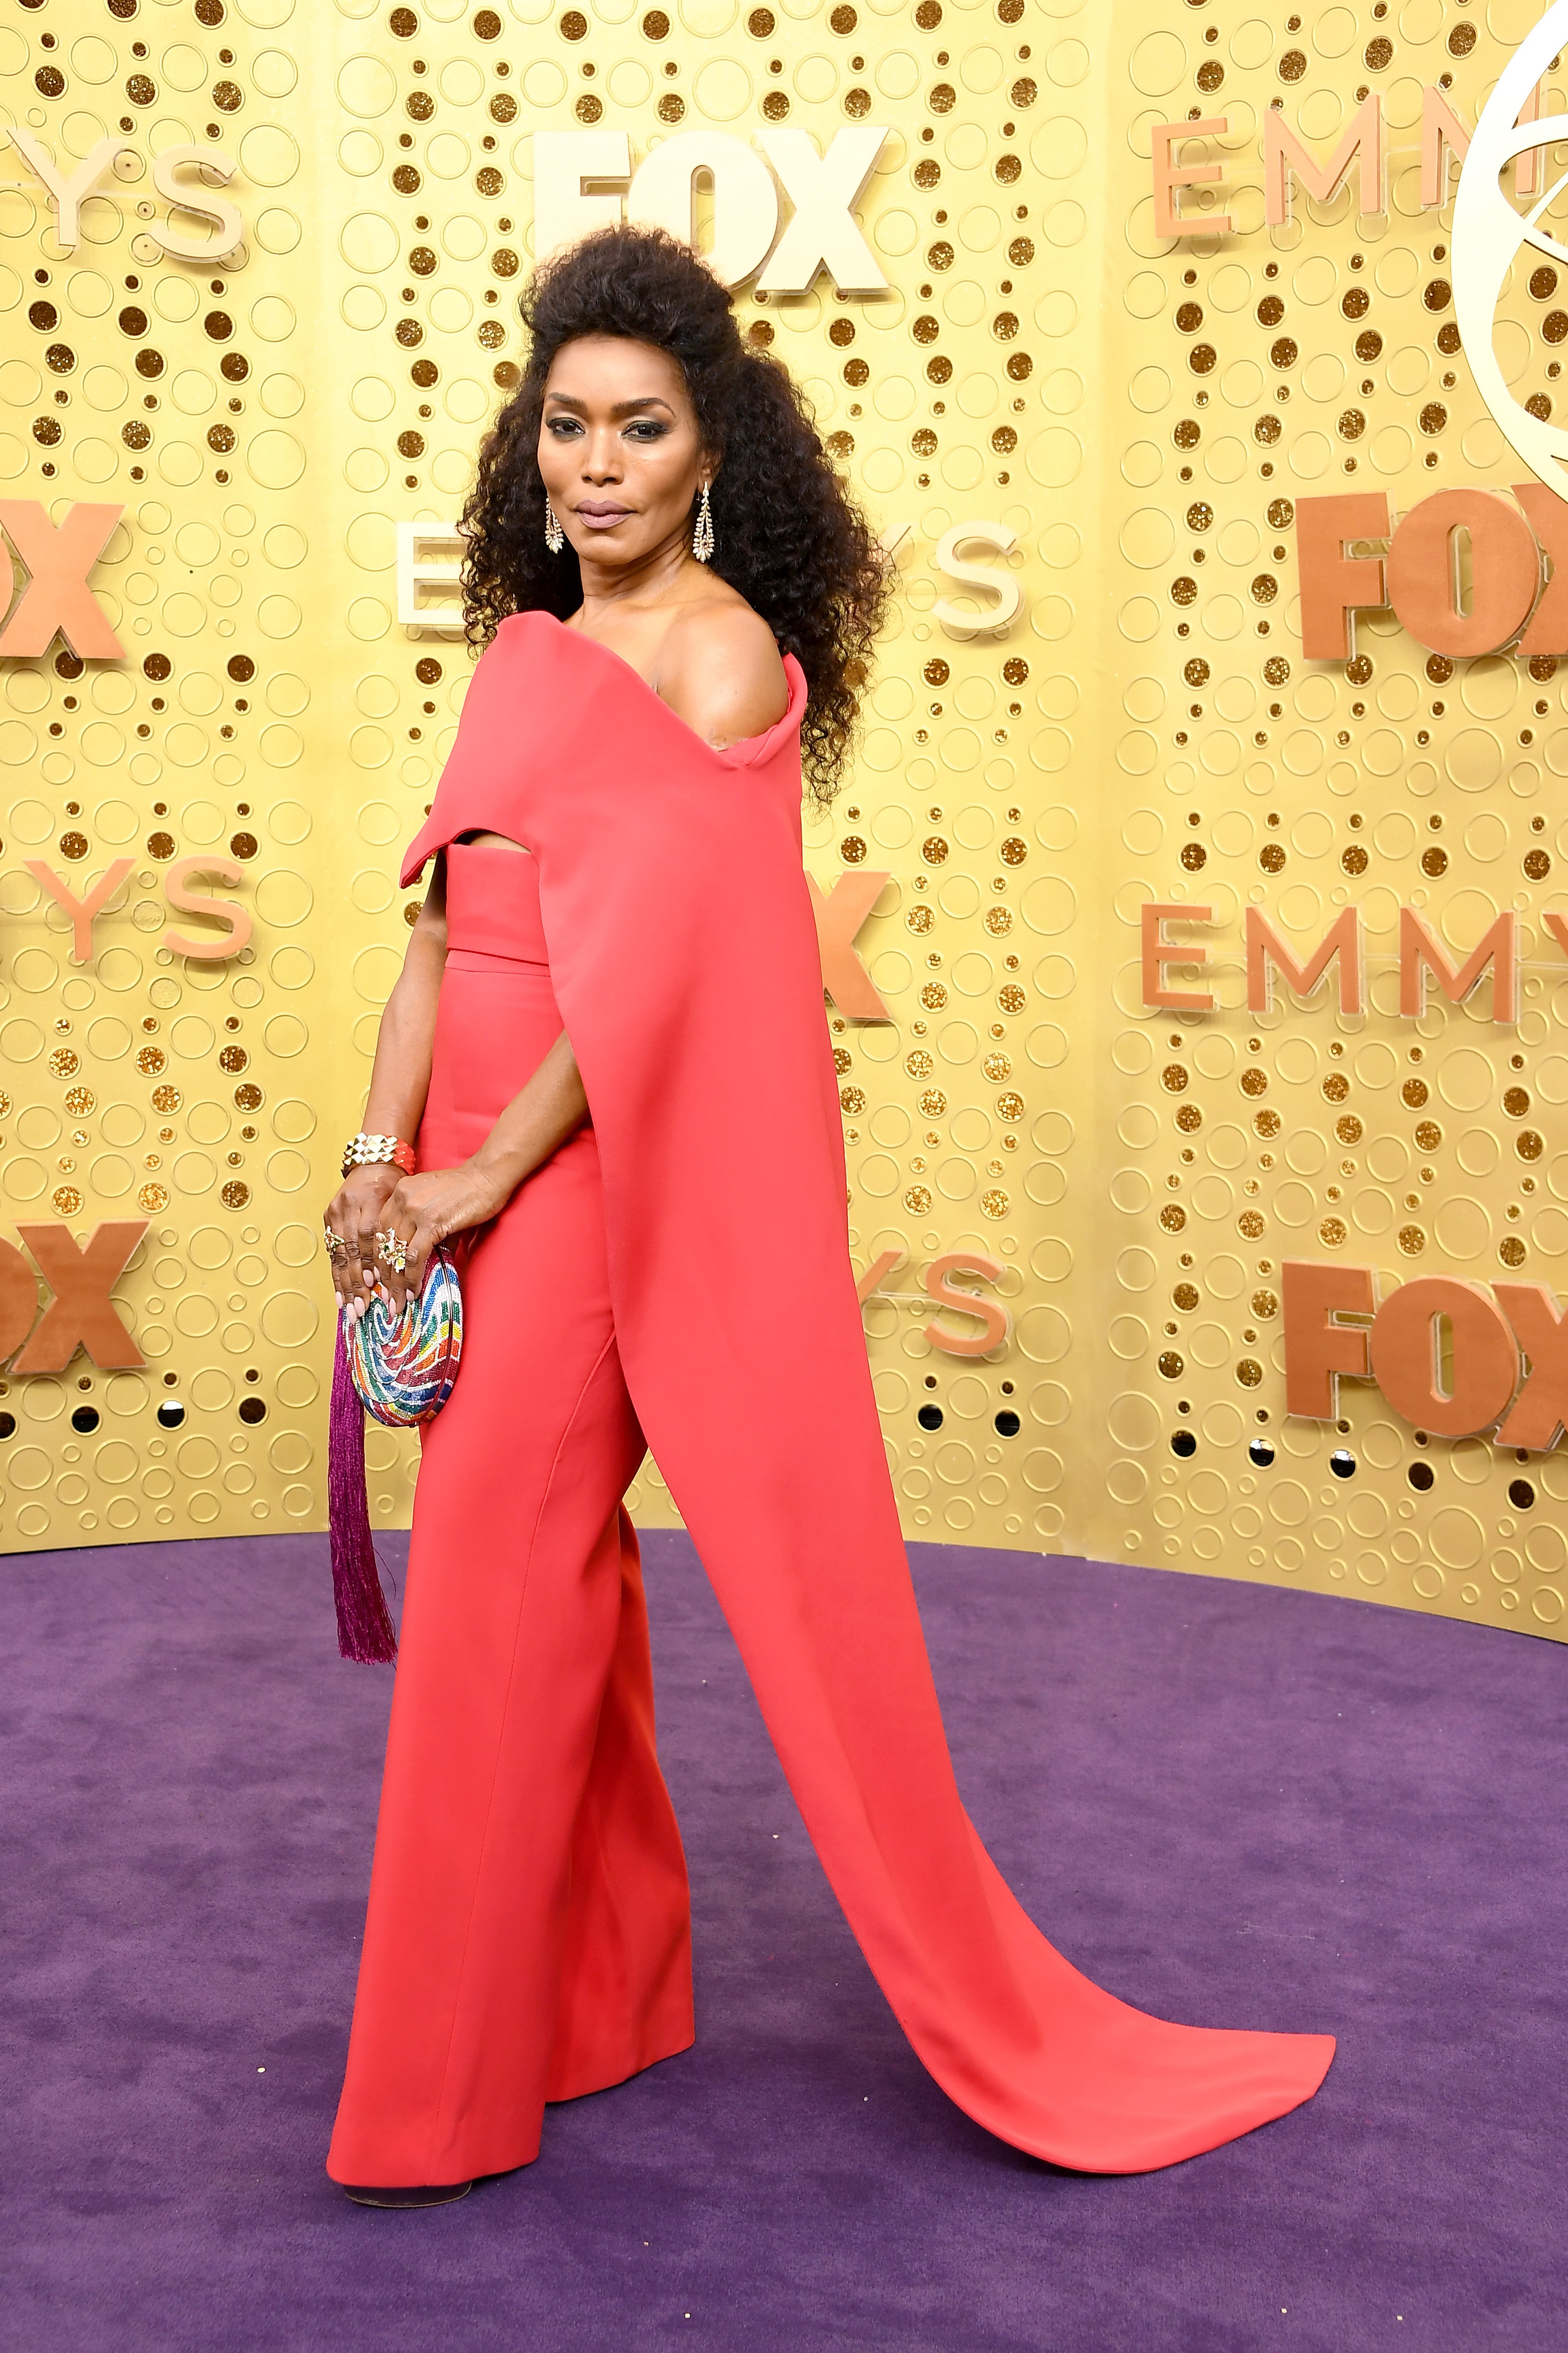 Shades of Red Are Trending At The 2019 Emmys